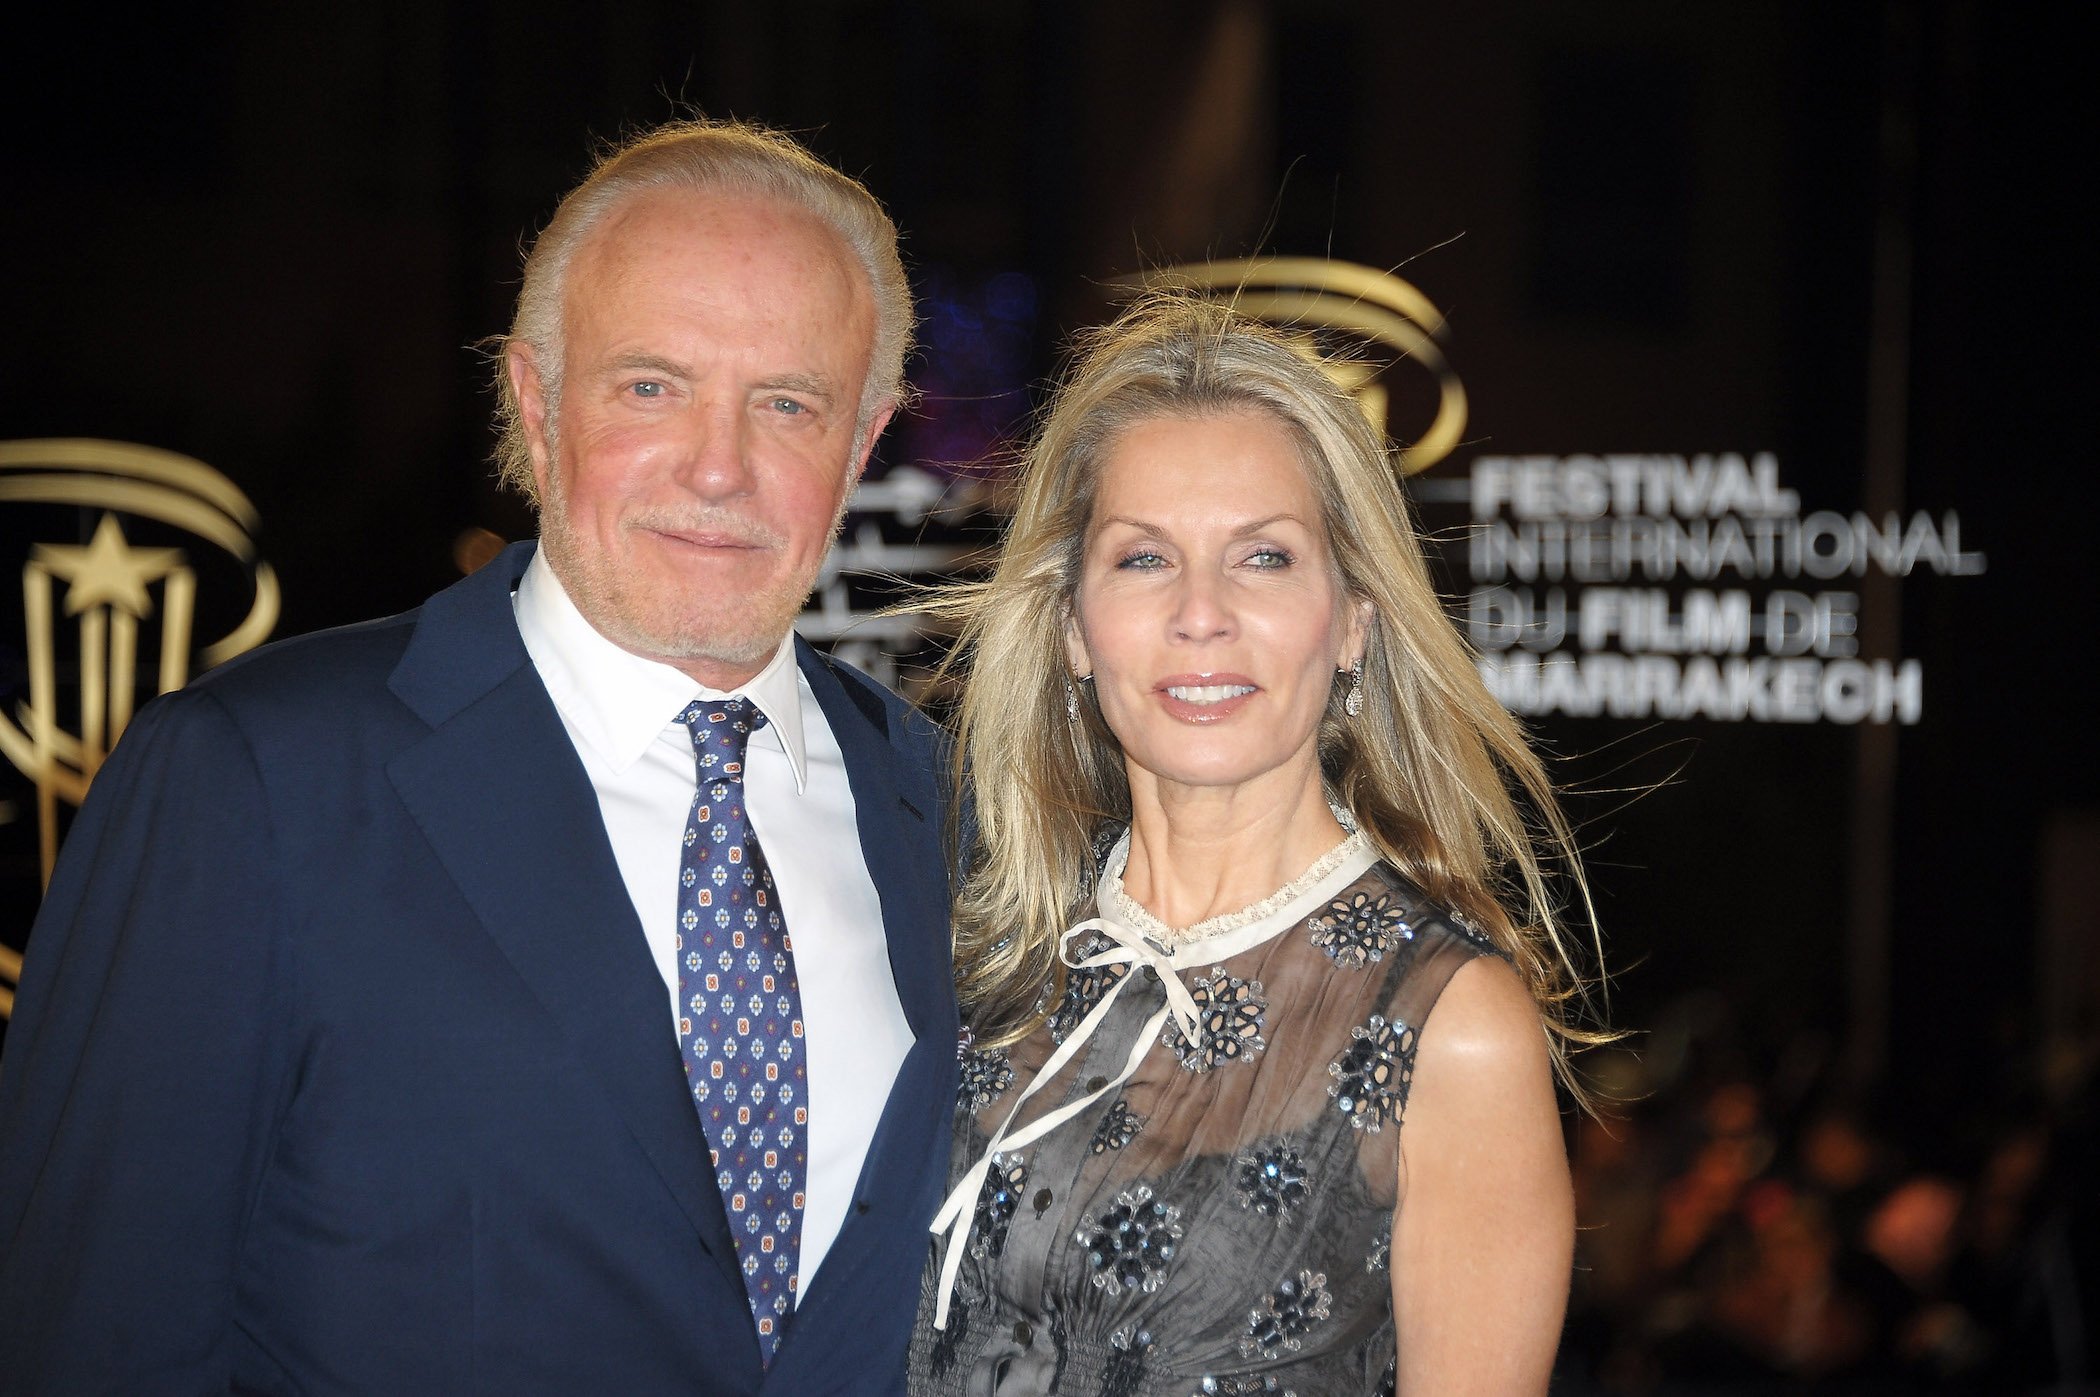 James Caan and ex-wife Linda Stokes standing next to each other at an event